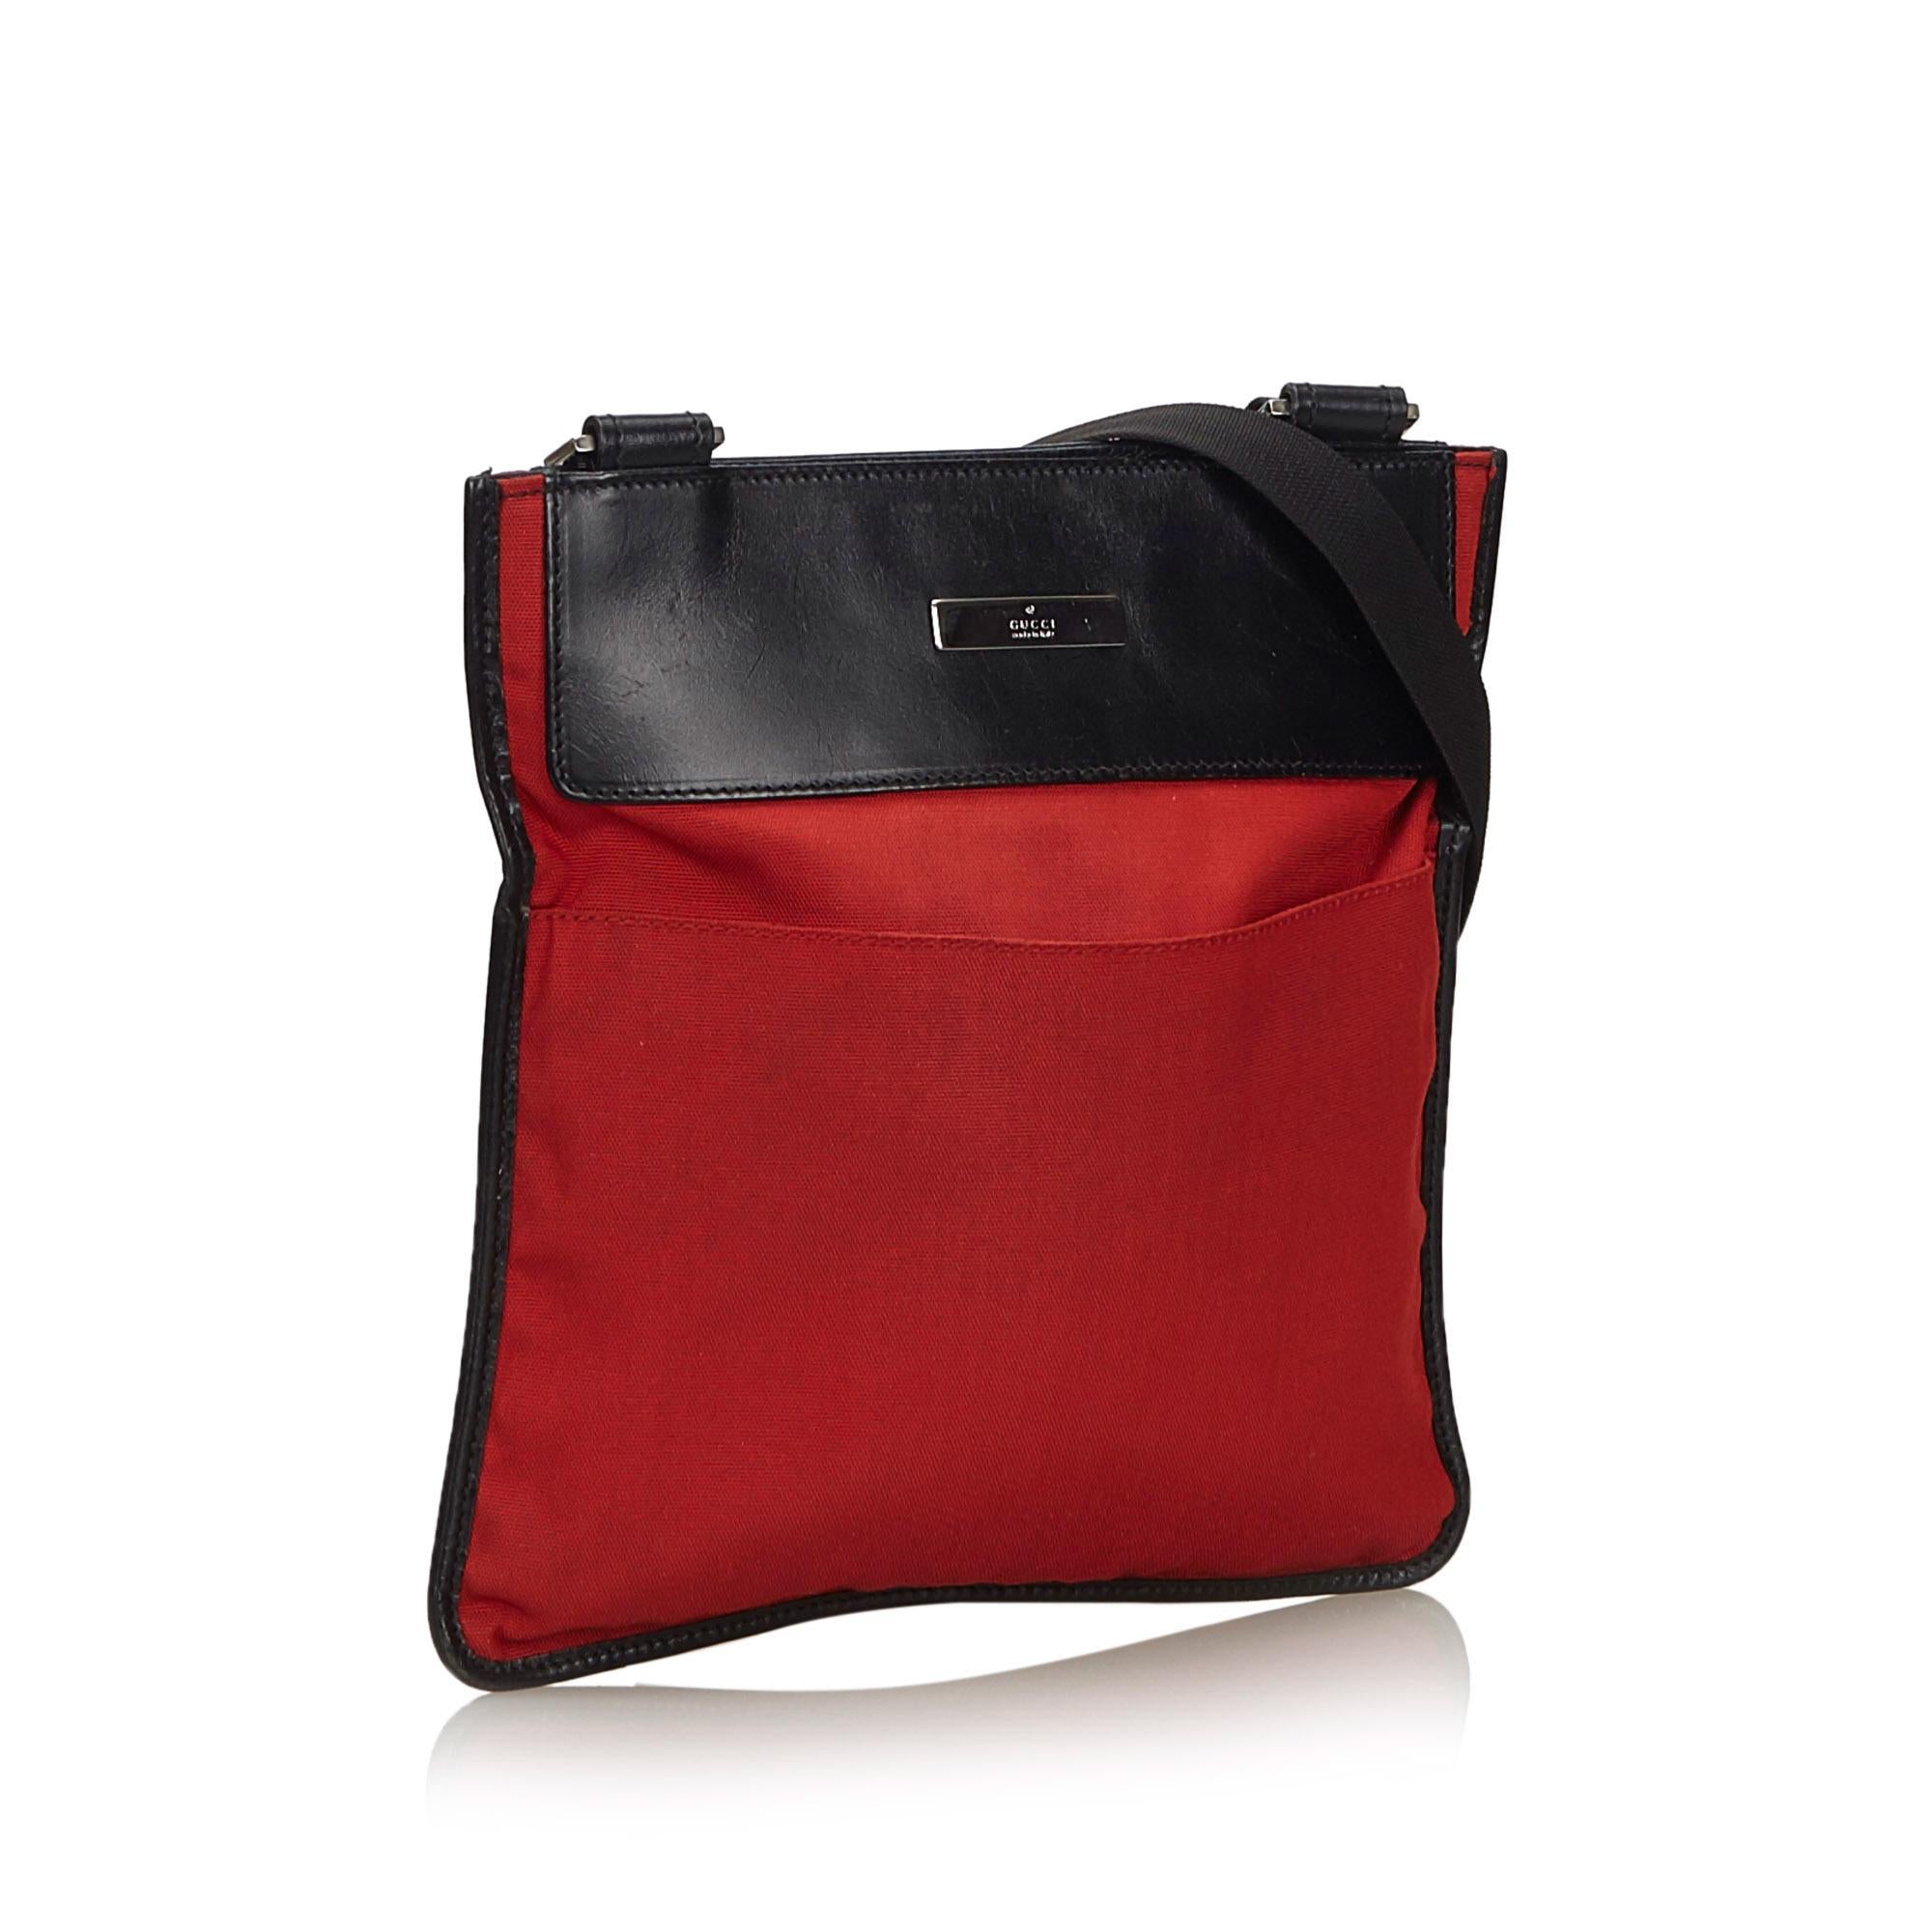 This crossbody bag features a nylon body with leather trim, front and back exterior slip pockets, a flat strap, an open top, and an interior zip pocket. It carries as B+ condition rating.

Inclusions: 
This item does not come with